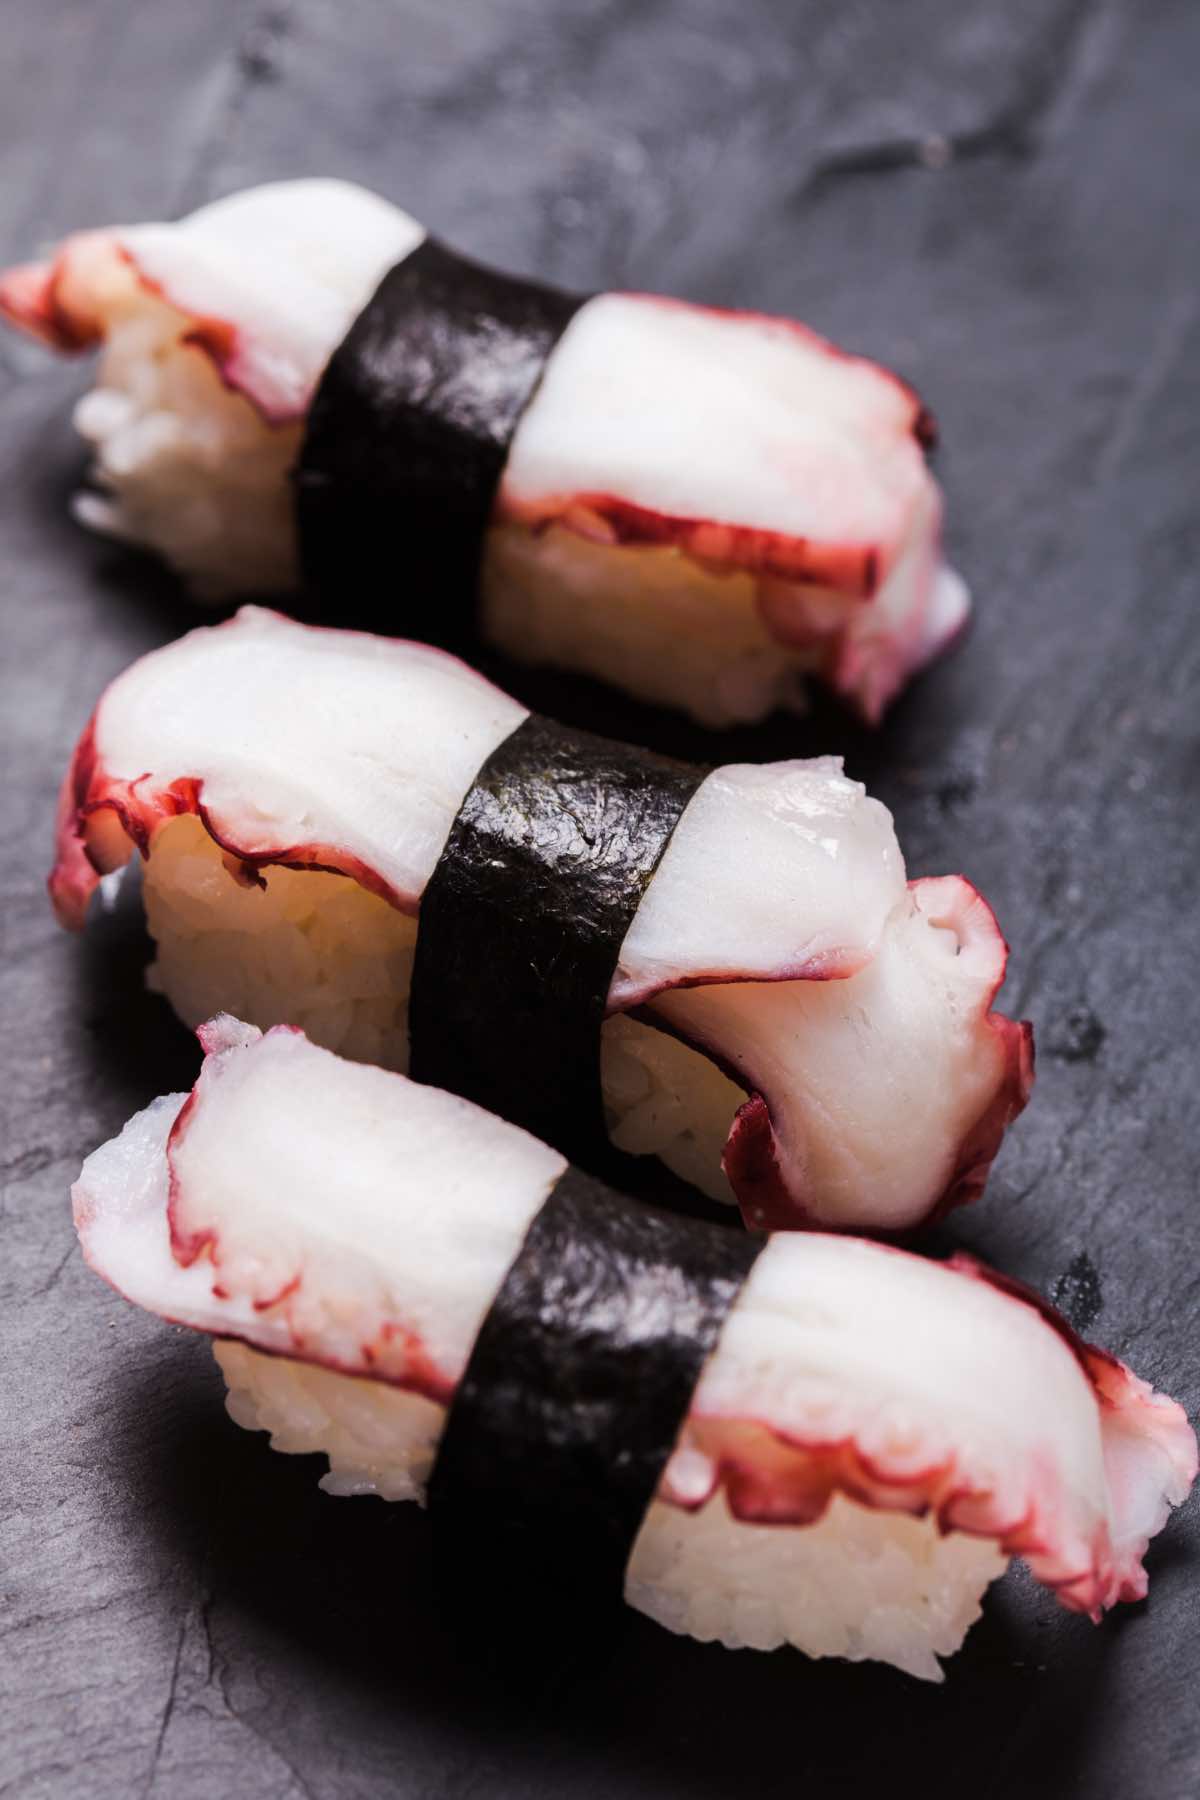 Japanese Octopus Sushi, or Tako nigiri is a traditional Japanese sushi roll that consists of a small ball of seasoned sushi rice topped with slices of sashimi-grade octopus. The rice and octopus are held together by a thin strip of nori